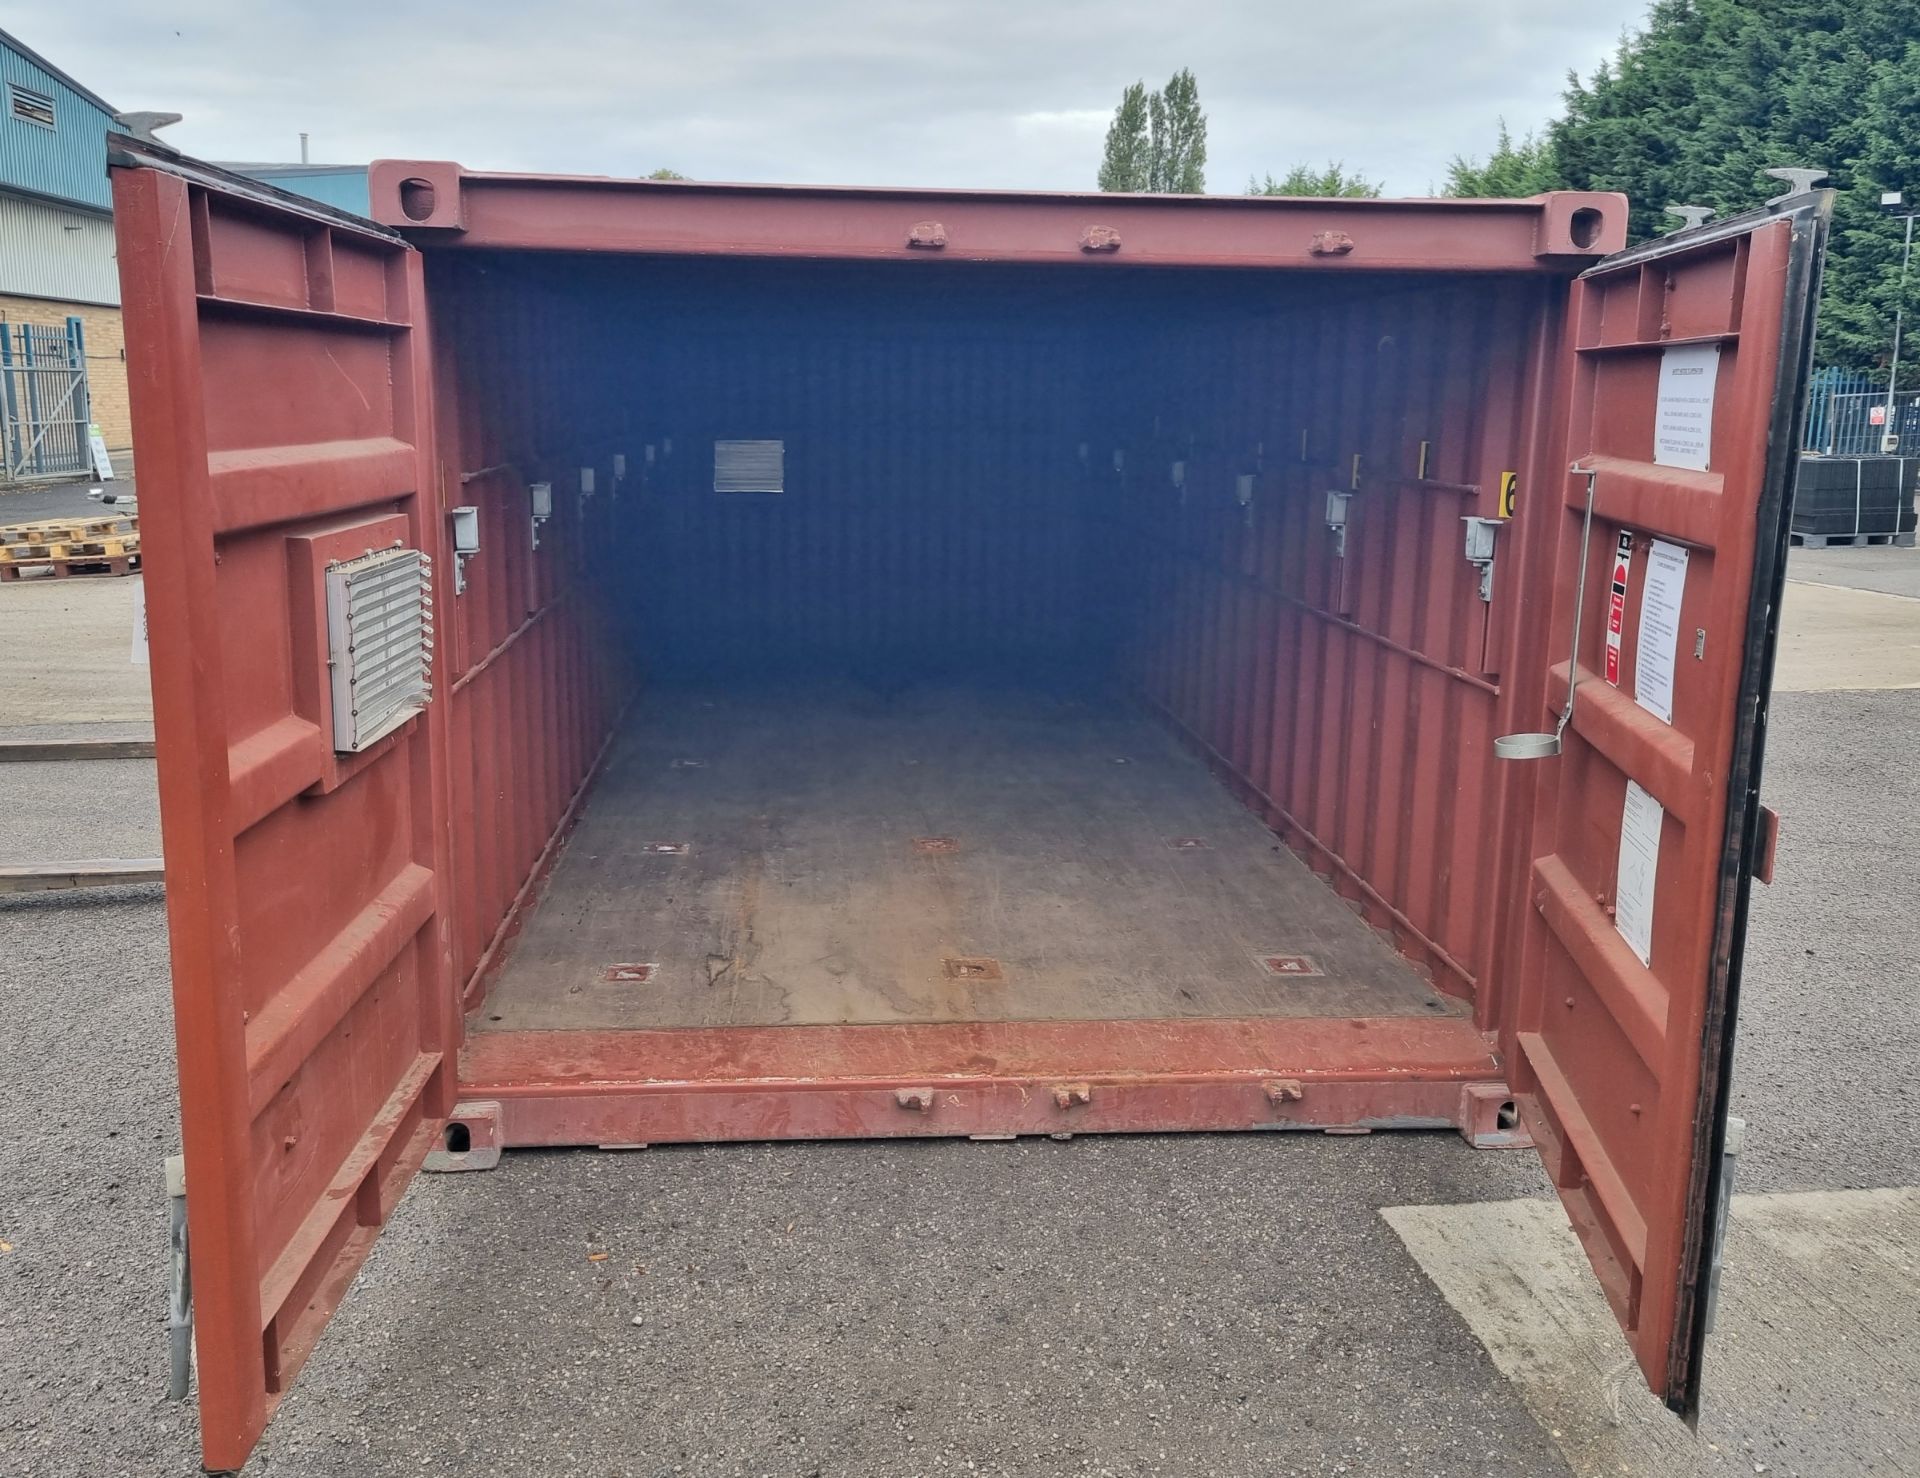 Stonehaven Engineering Ltd transportable storage container ISO 499/99/01 - dimensions: 20ft x 8ft x - Bild 5 aus 6